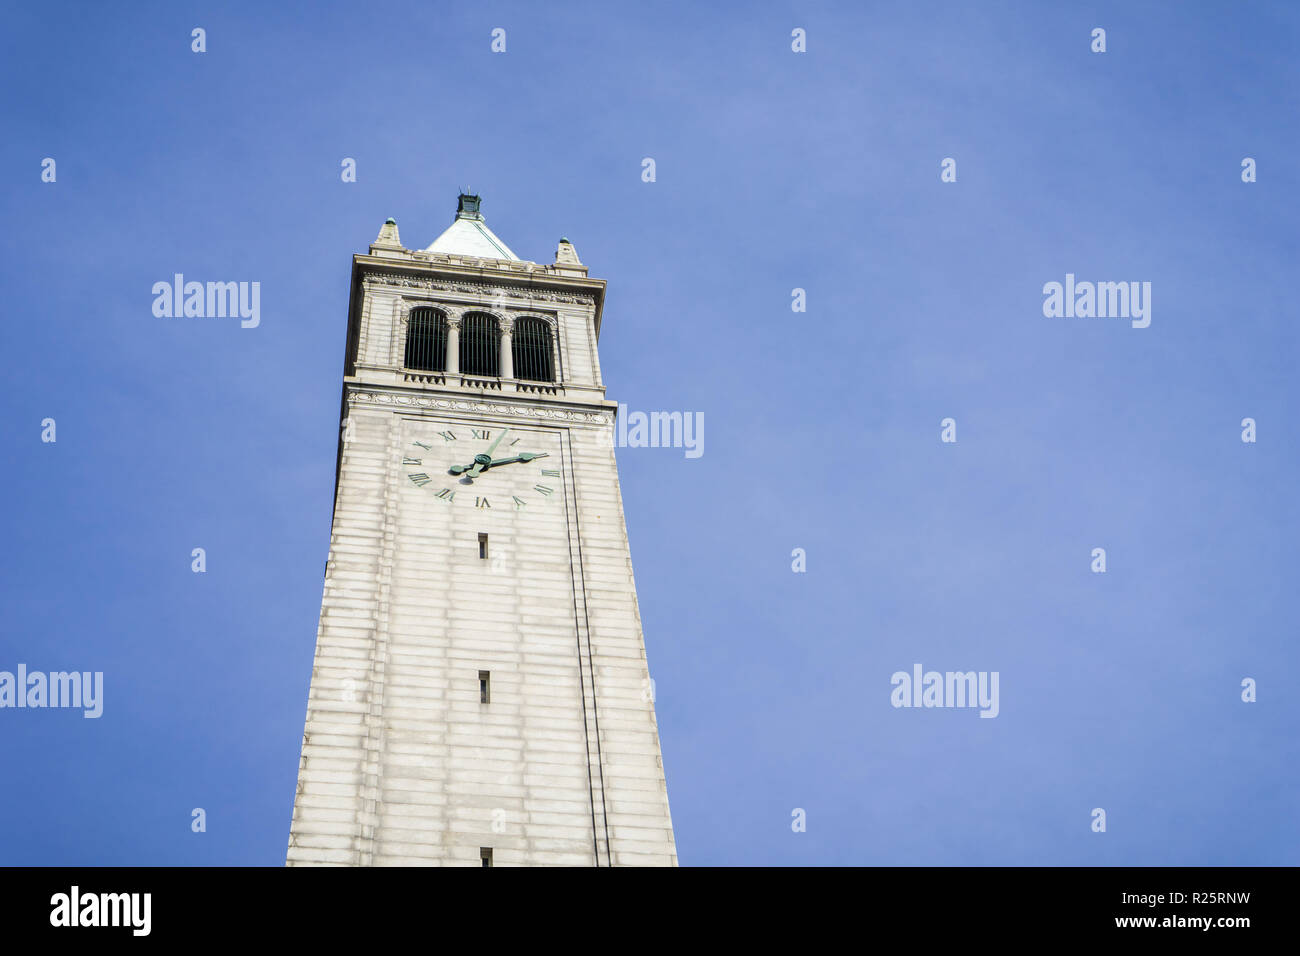 Sather tower (the Campanile) on a blue sky background, Berkeley, San Francisco bay, California Stock Photo